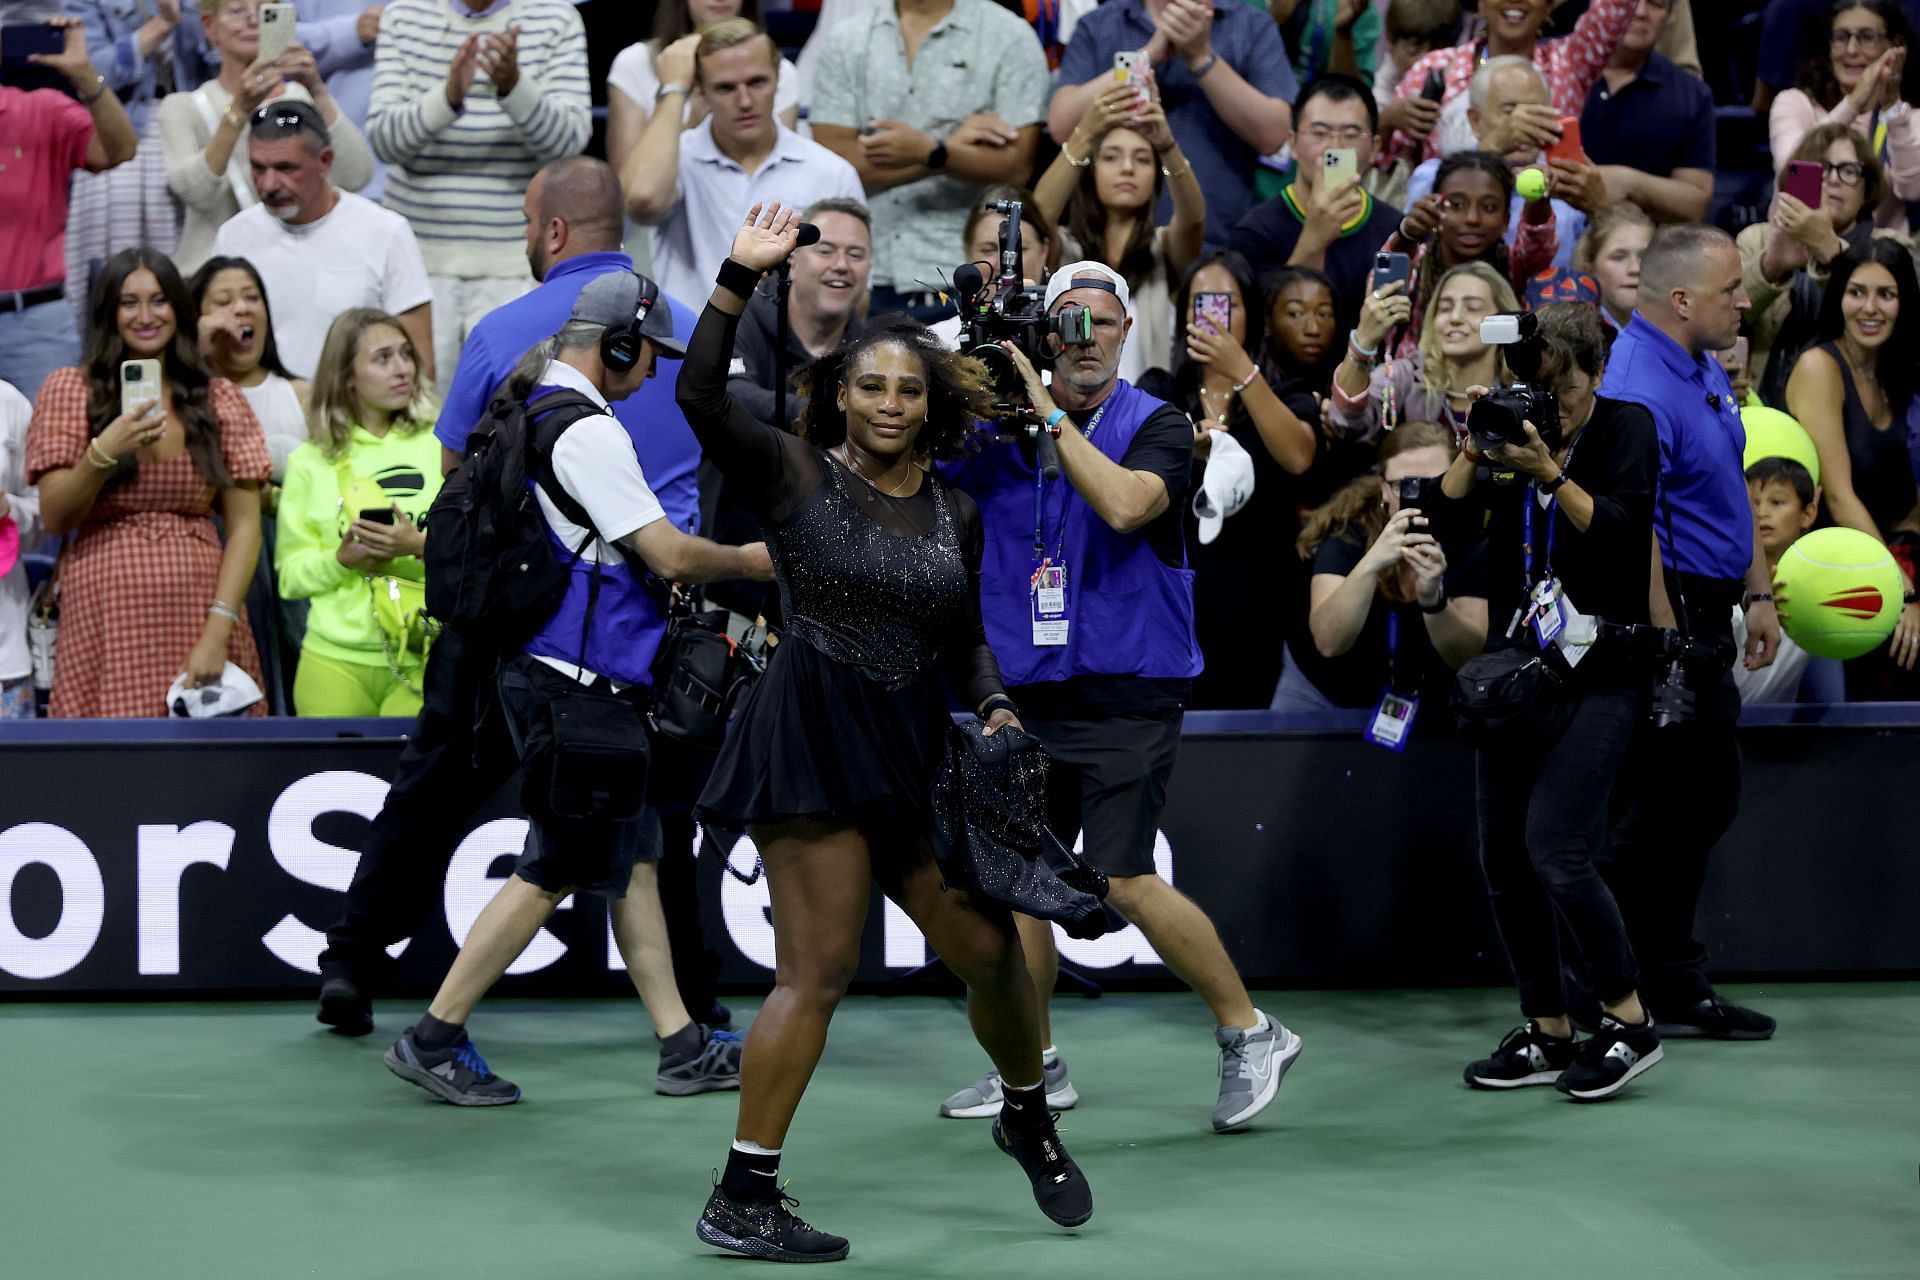 Serena Williams of the United States thanks the fans after being defeated by Ajla Tomlijanovic at the 2022 US Open - Day 5